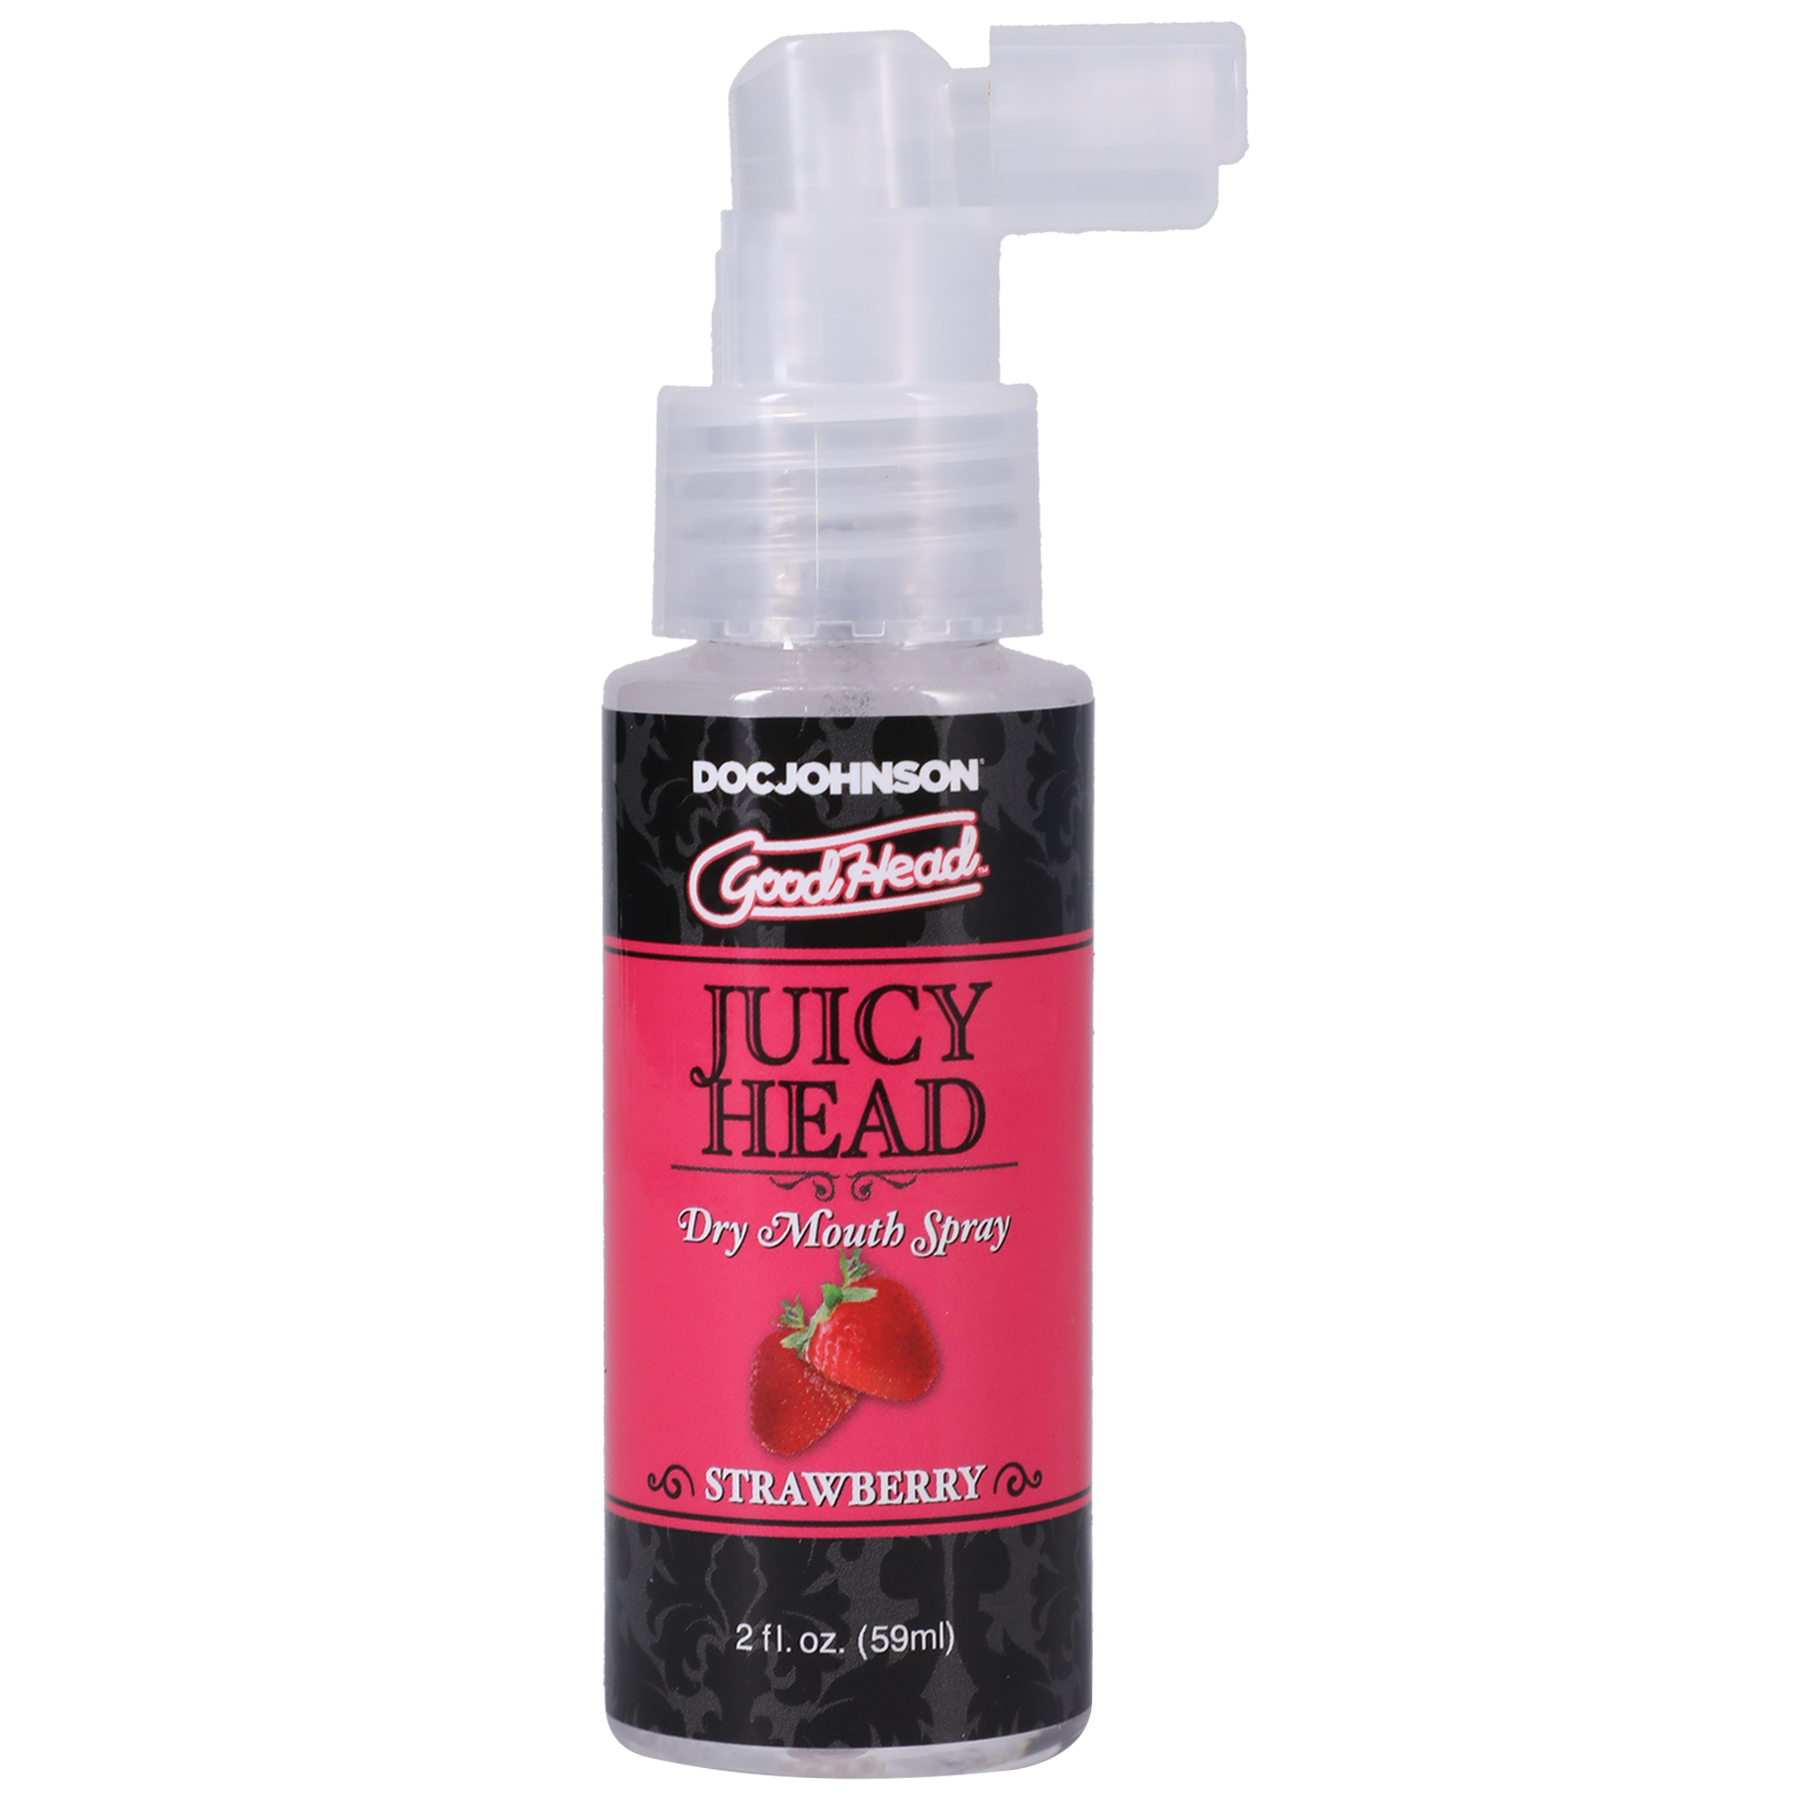 Photo of the bottle of GoodHead Juicy Head from Doc Johson (strawberry) shows its easy to use pump spray nozzle.